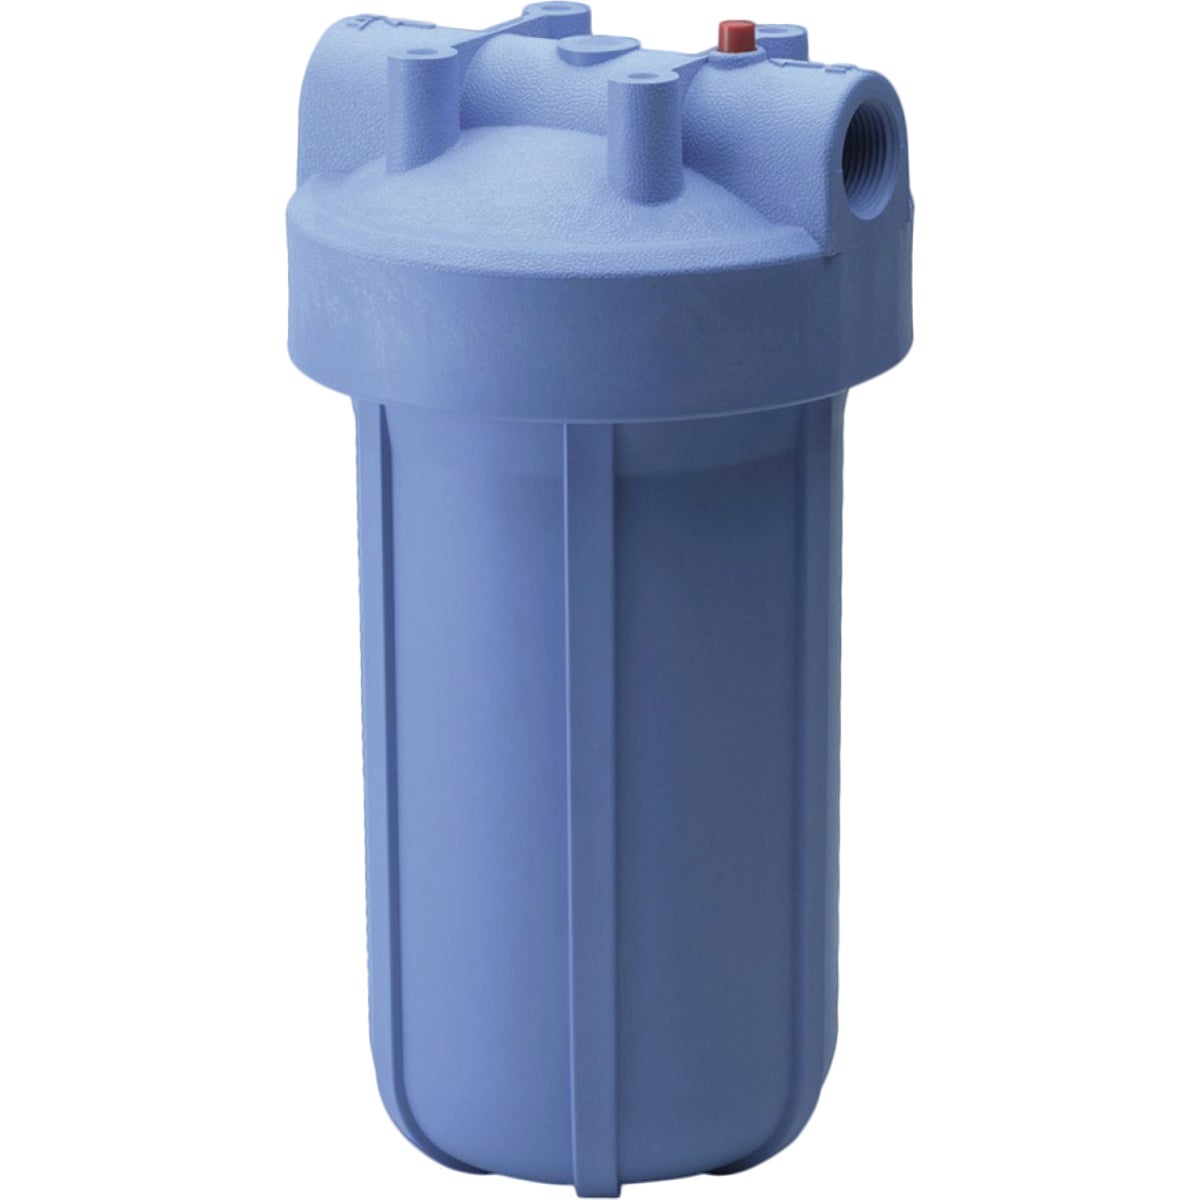 Item 432660, Heavy-duty water filter is ideal for high-flow/heavy-sediment applications 